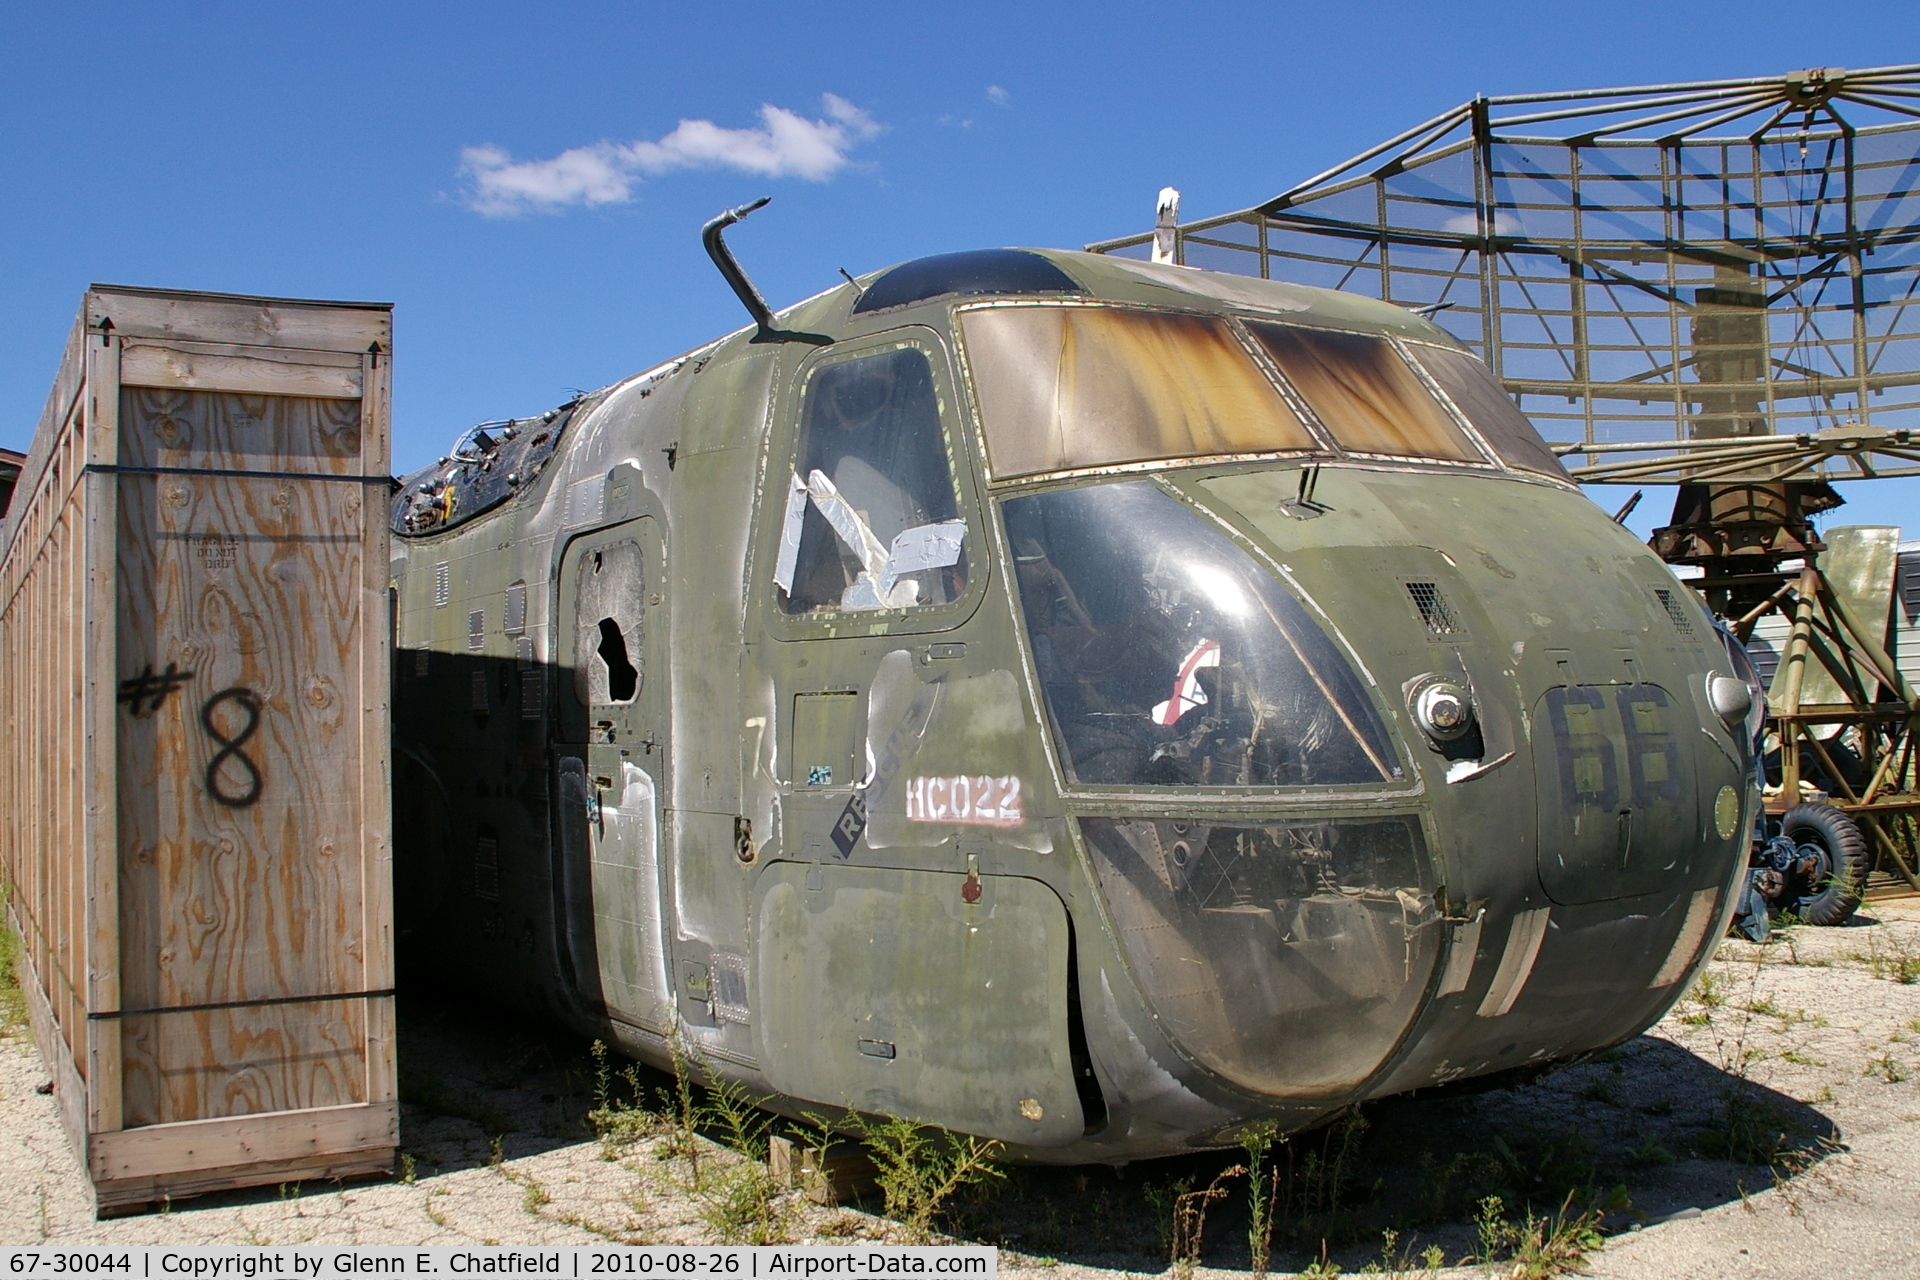 67-30044, 1967 Sikorsky CH-53A Sea Stallion C/N 65-061, This was USMC 153292, but was transferred to the Air Force.  It spent its last days training mechanics.  Now preserved, albeit in poor shape, at the Russell Military Museum